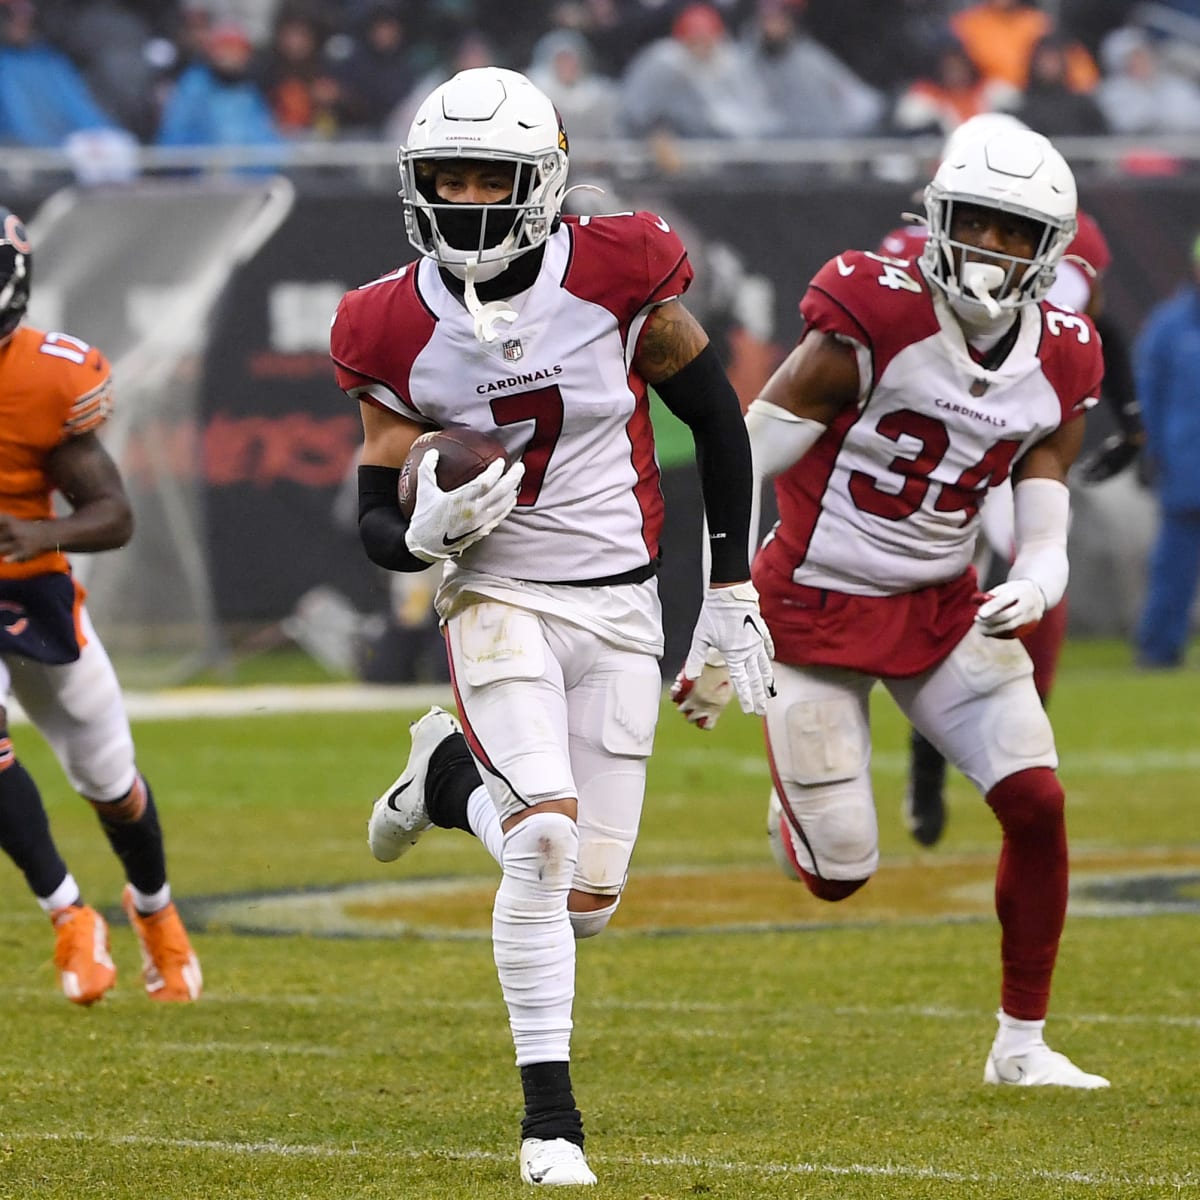 Patrick Peterson ends tenure with Cardinals, will join Vikings